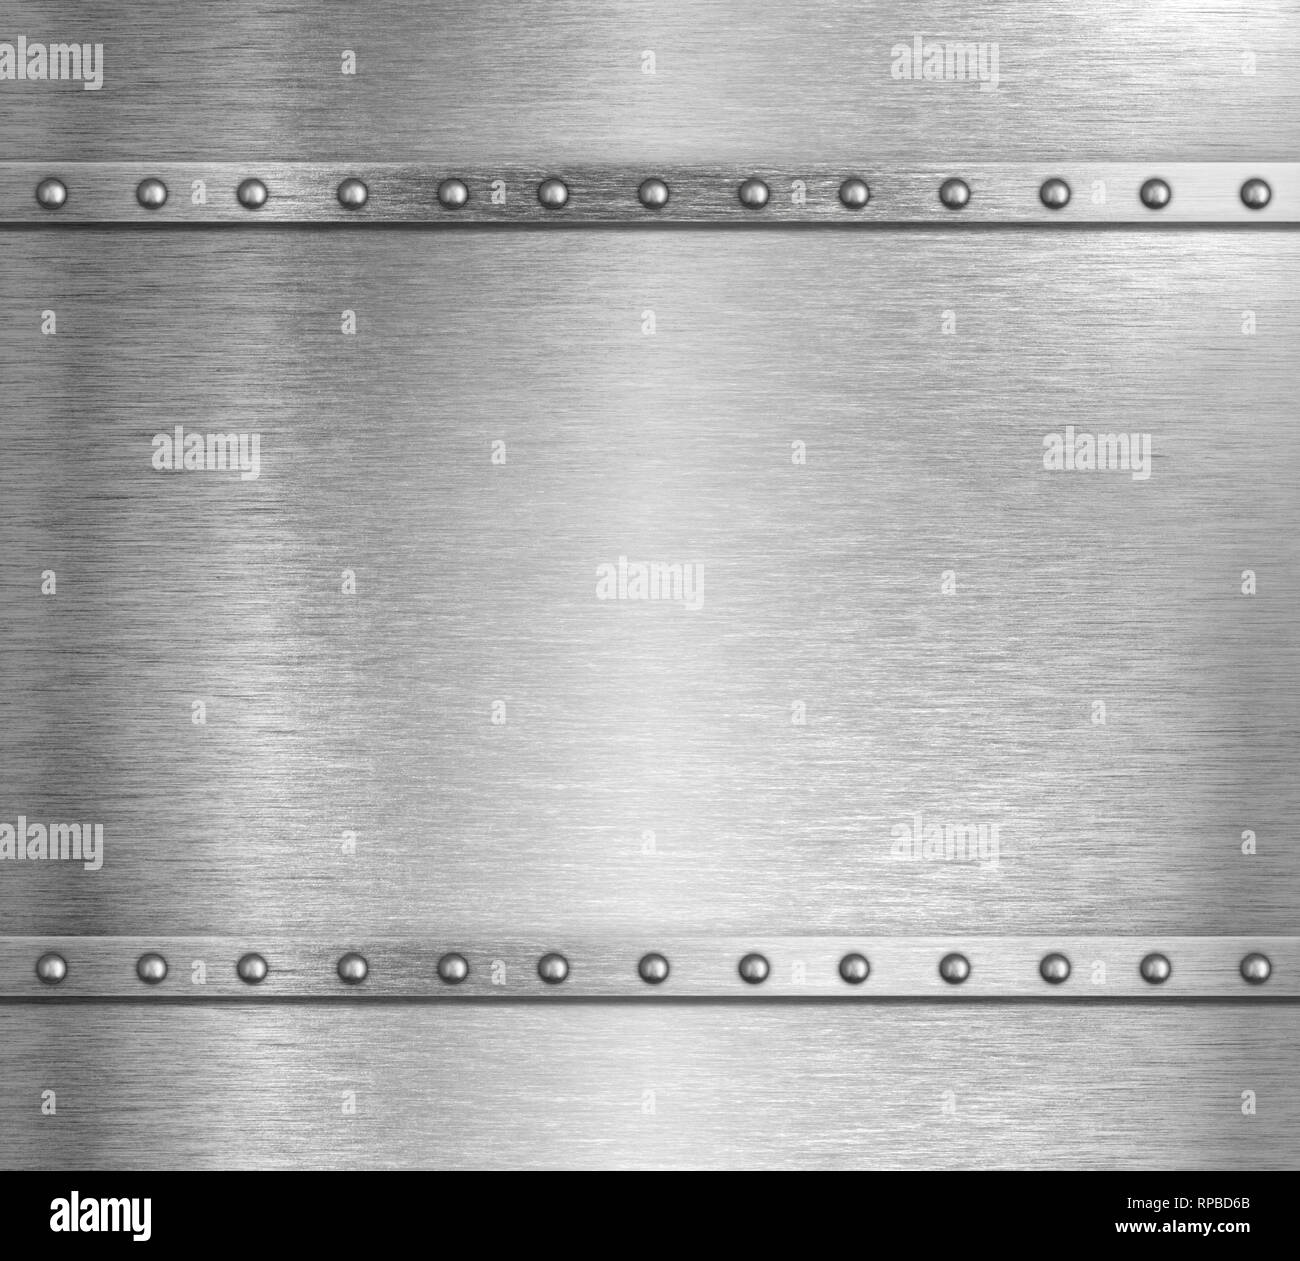 Metal steel background with rivets 3d illustration Stock Photo